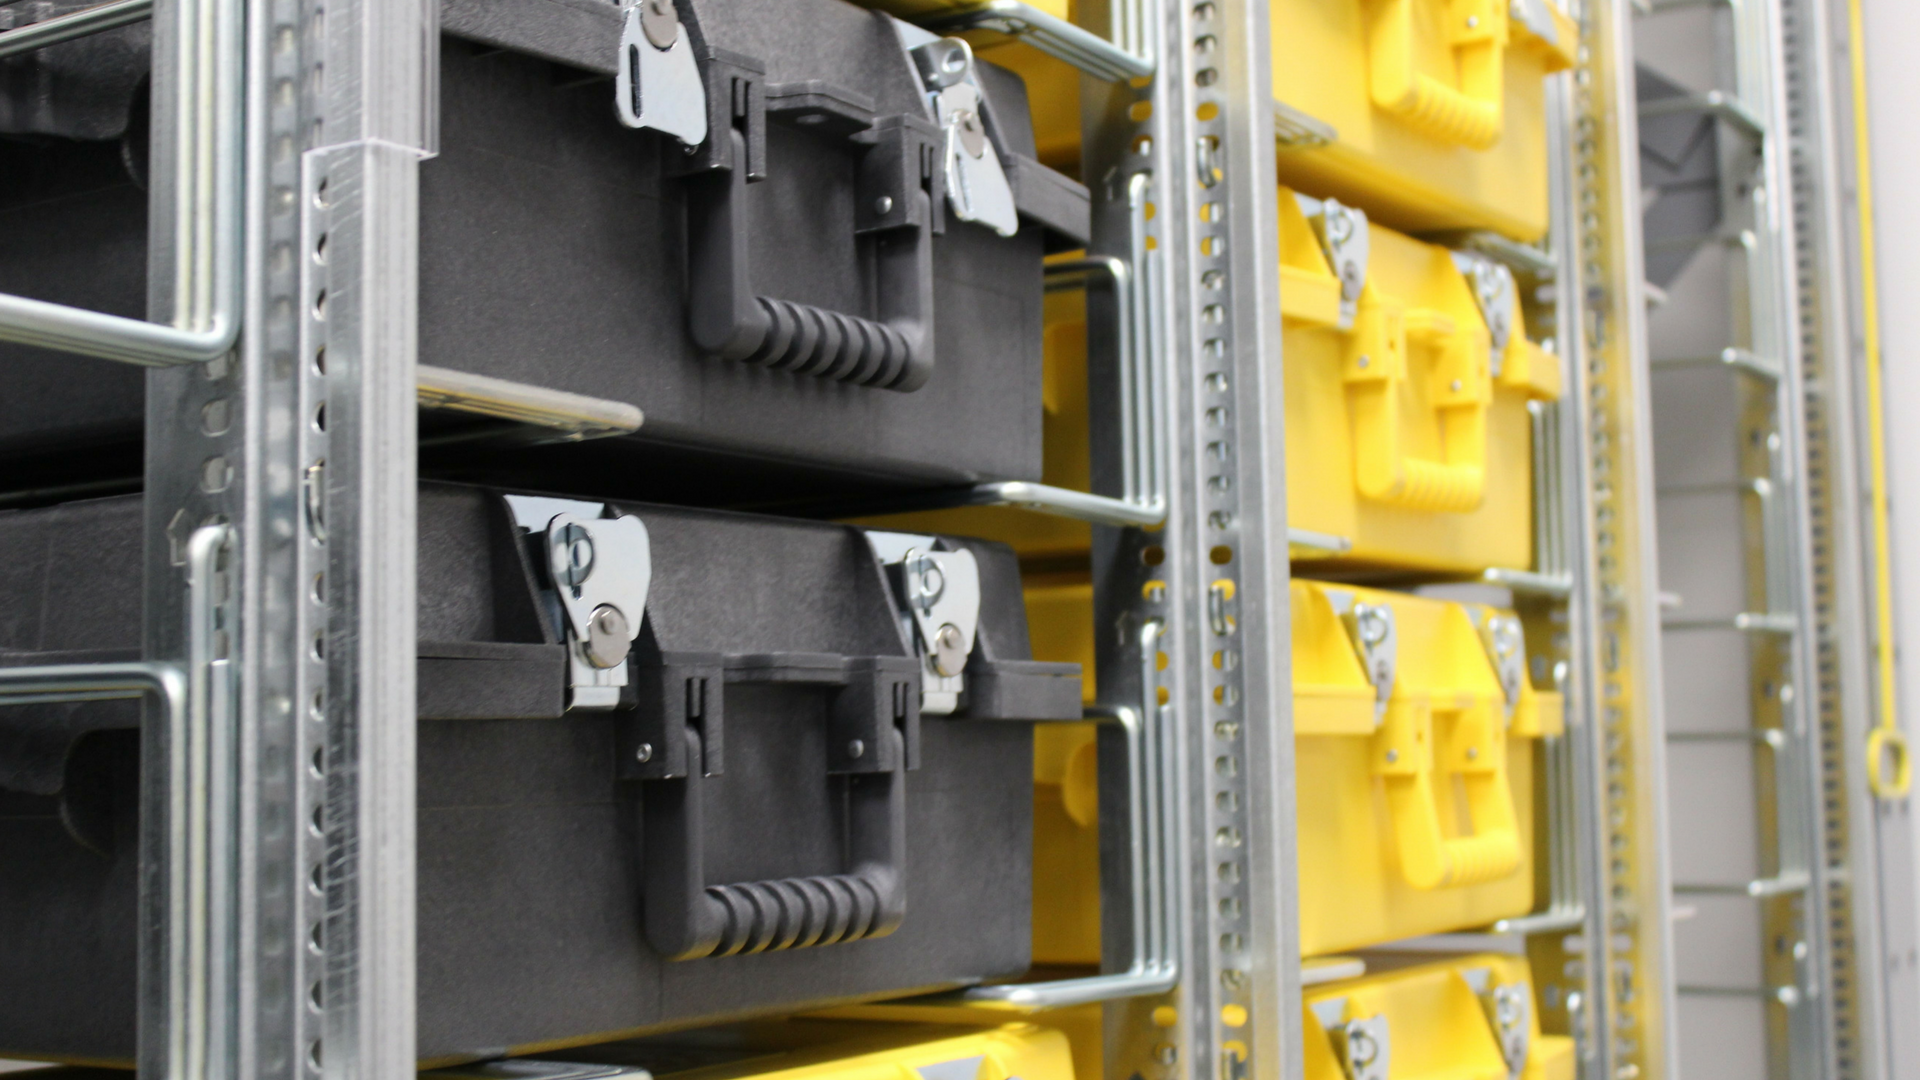 Vågn op Sow spurv What is Tape Vaulting? - Seery Systems Group